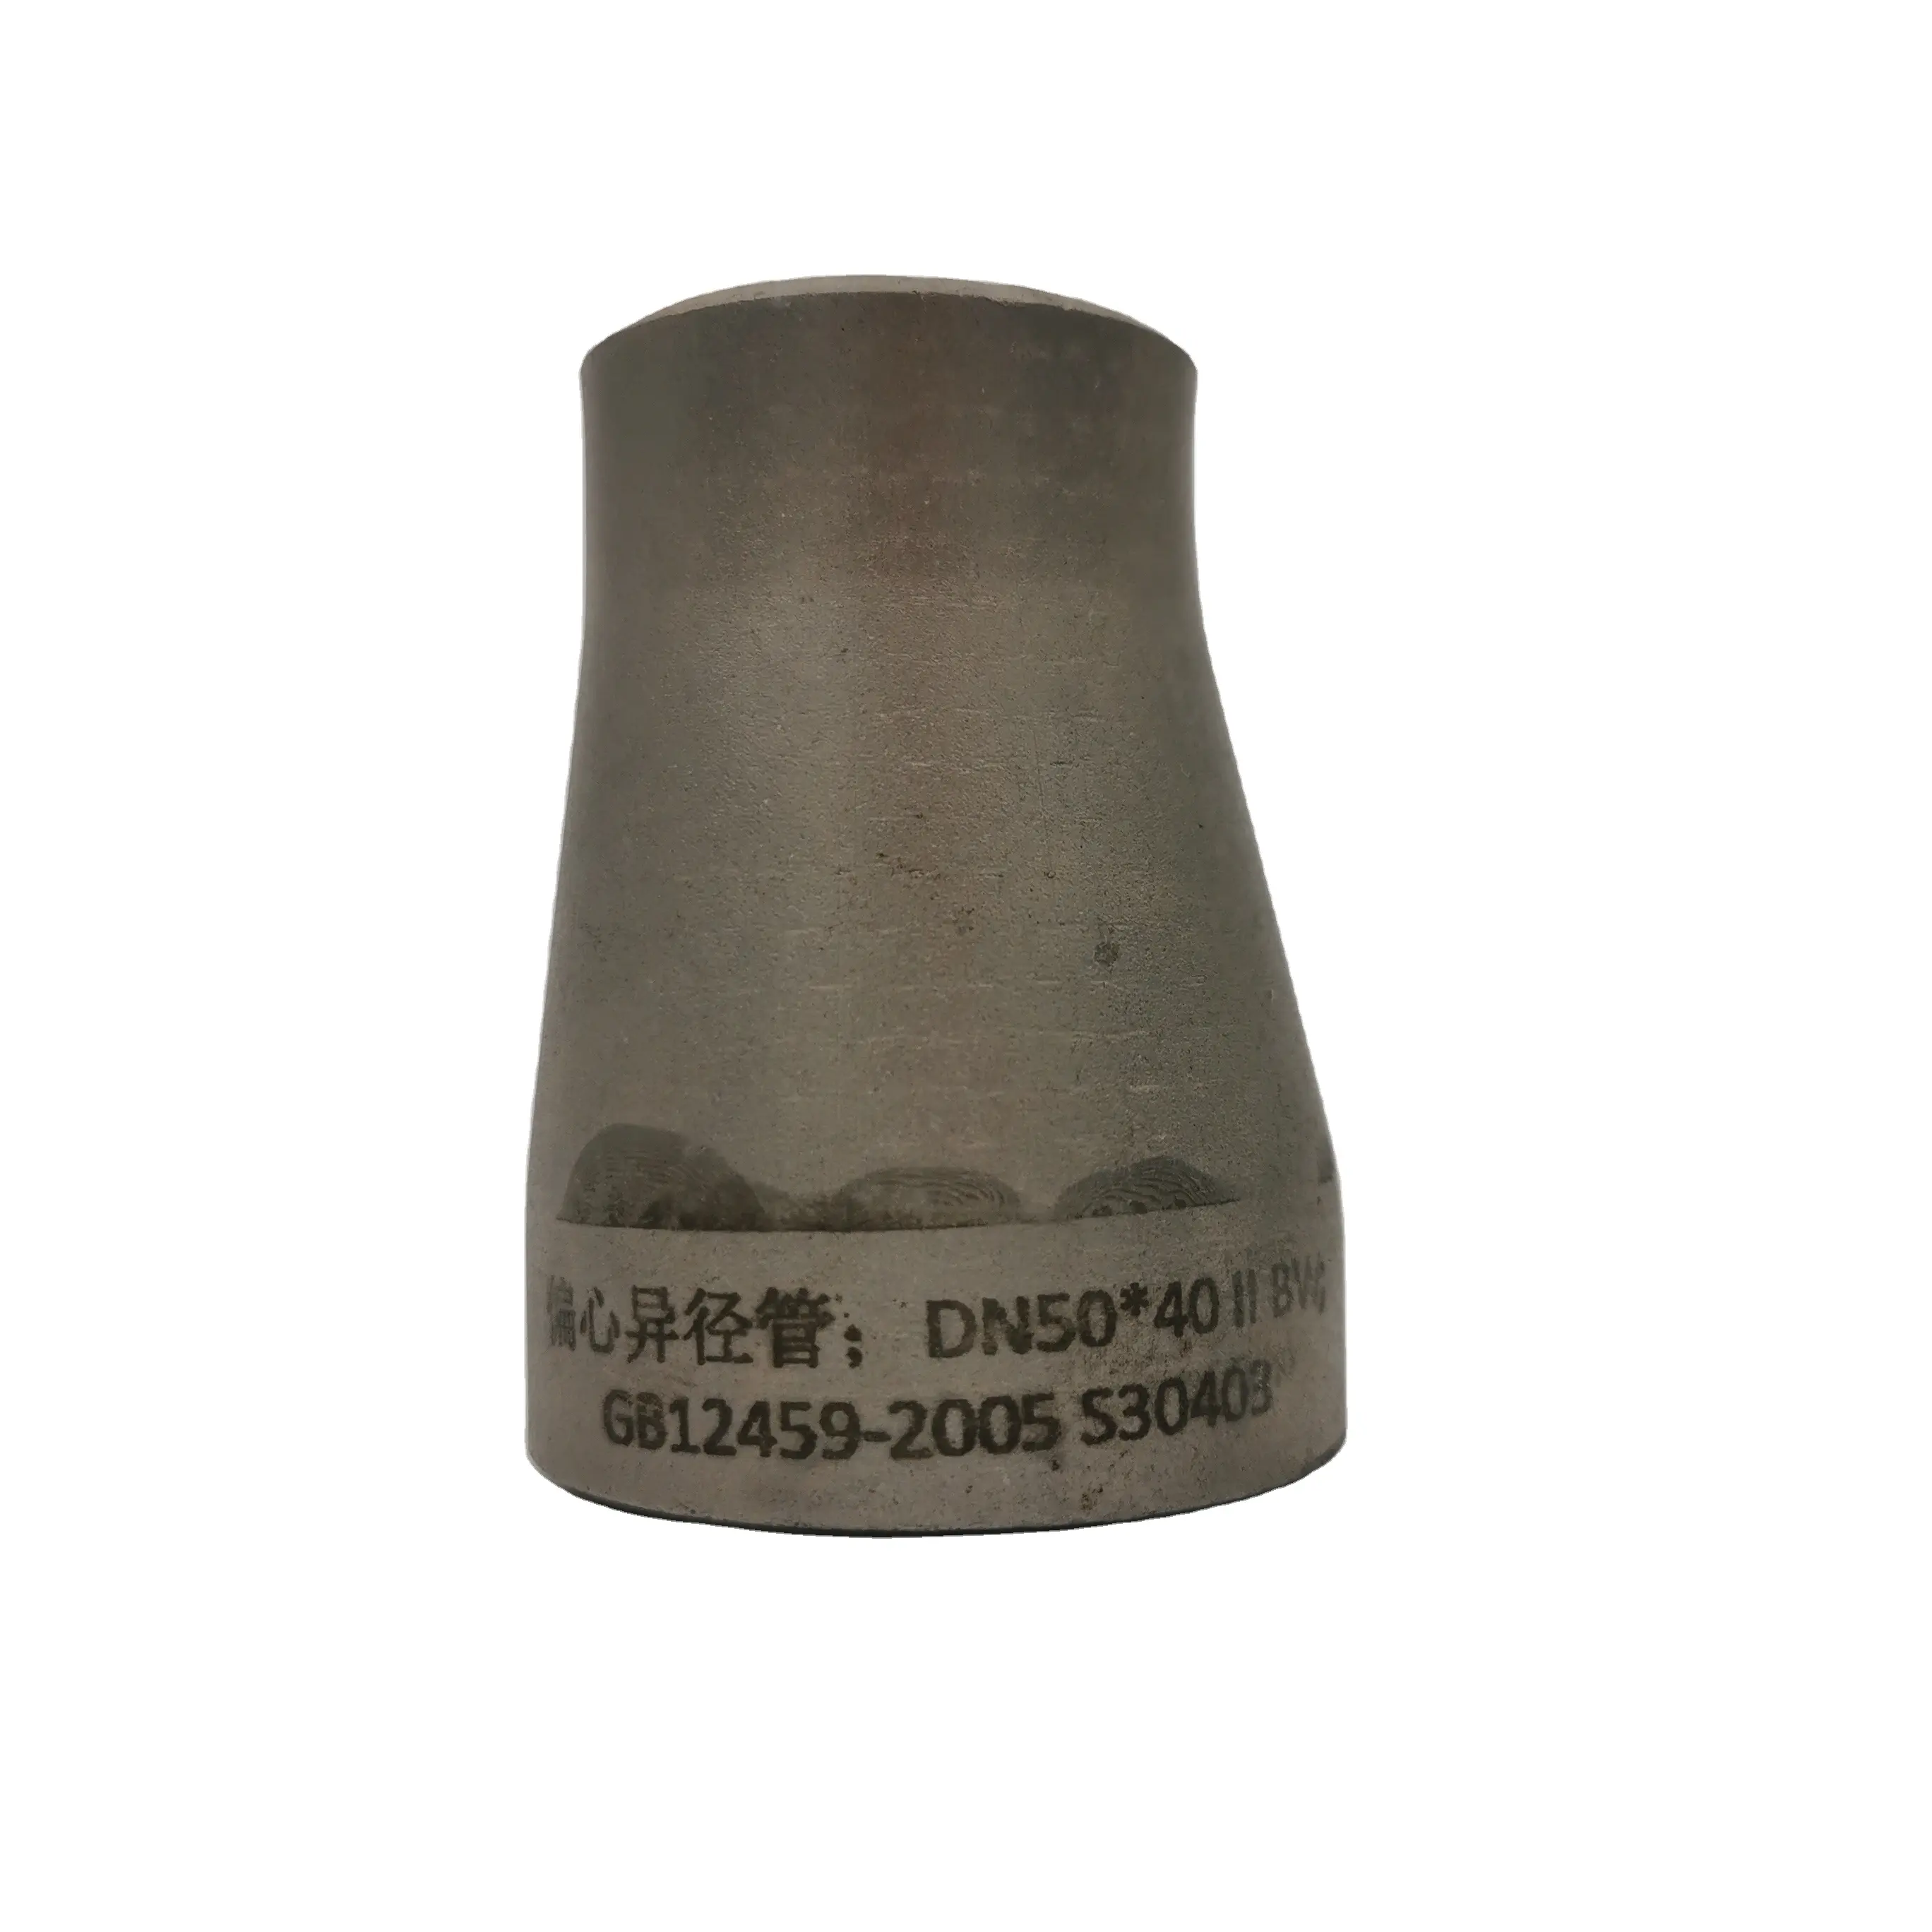 Union Connection Reducing Pipe 10mm Sight Glass Bushing Wyes Model DN15 round Head Code Nipple Plug Available Various Shapes